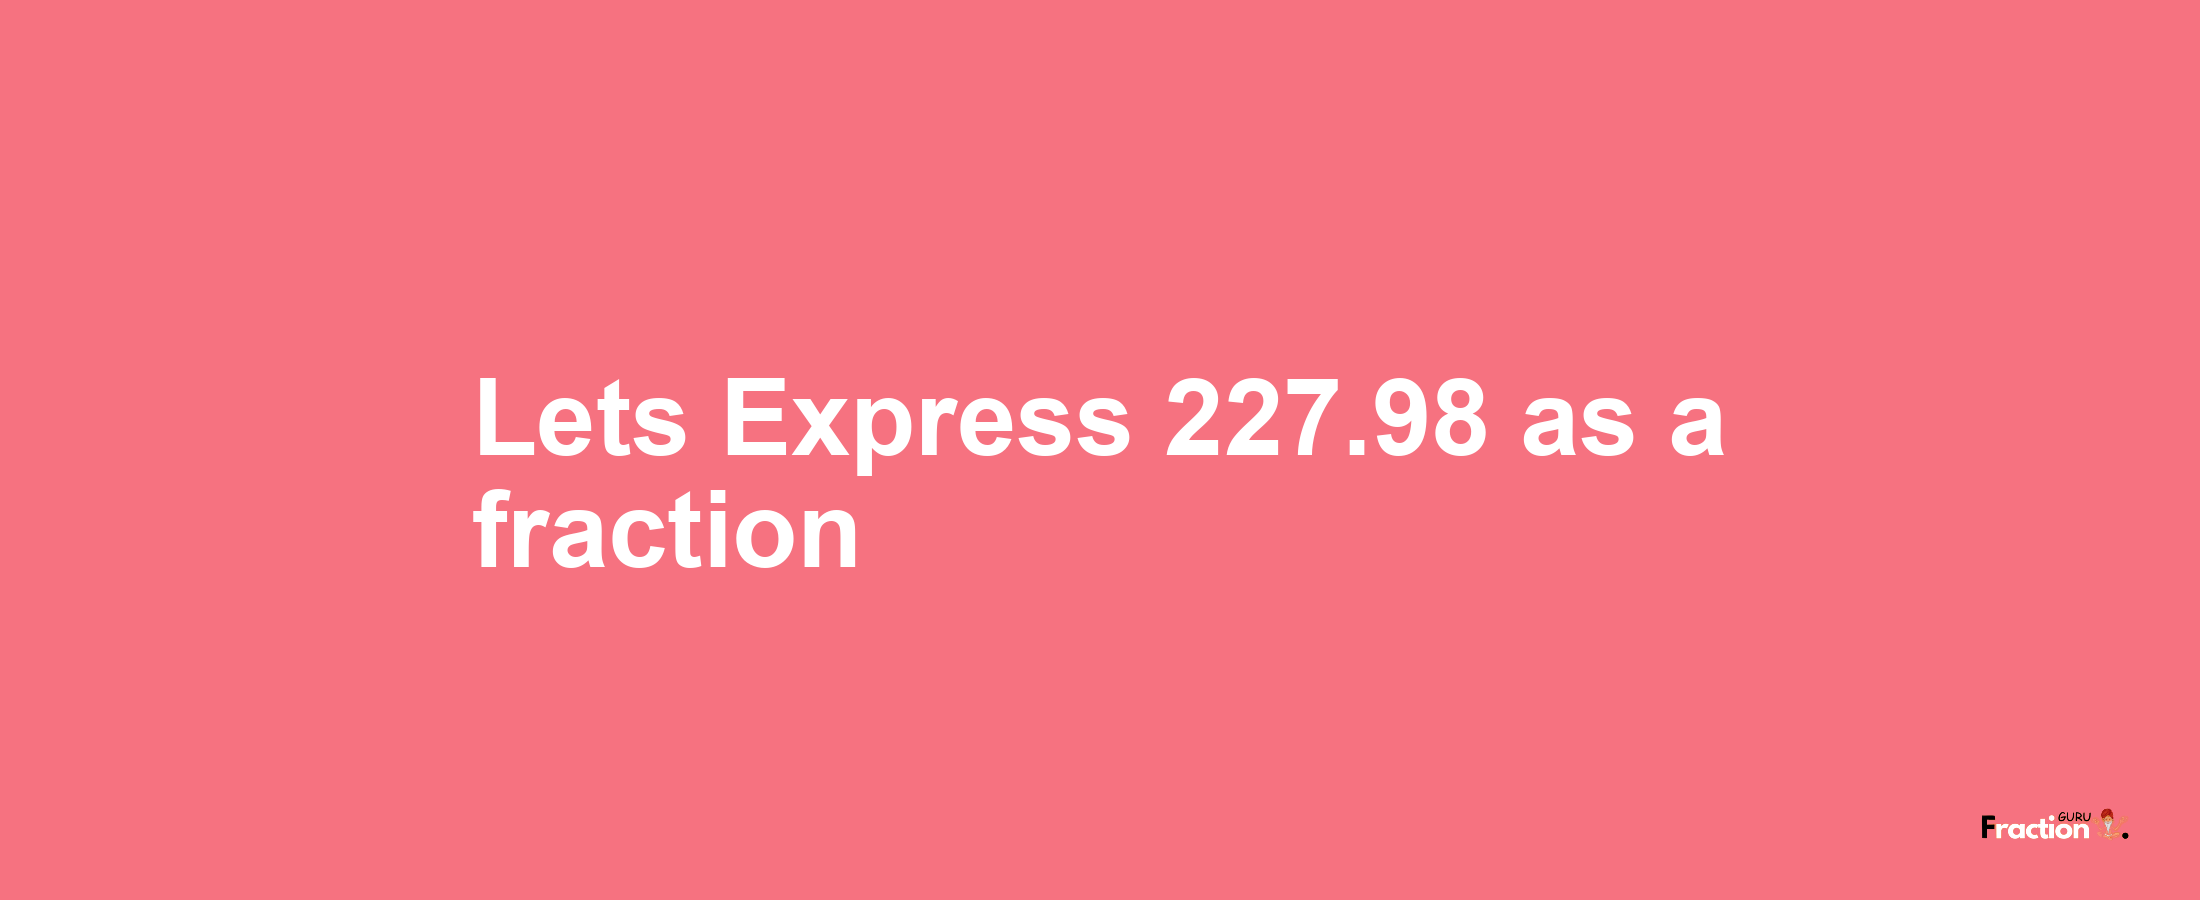 Lets Express 227.98 as afraction